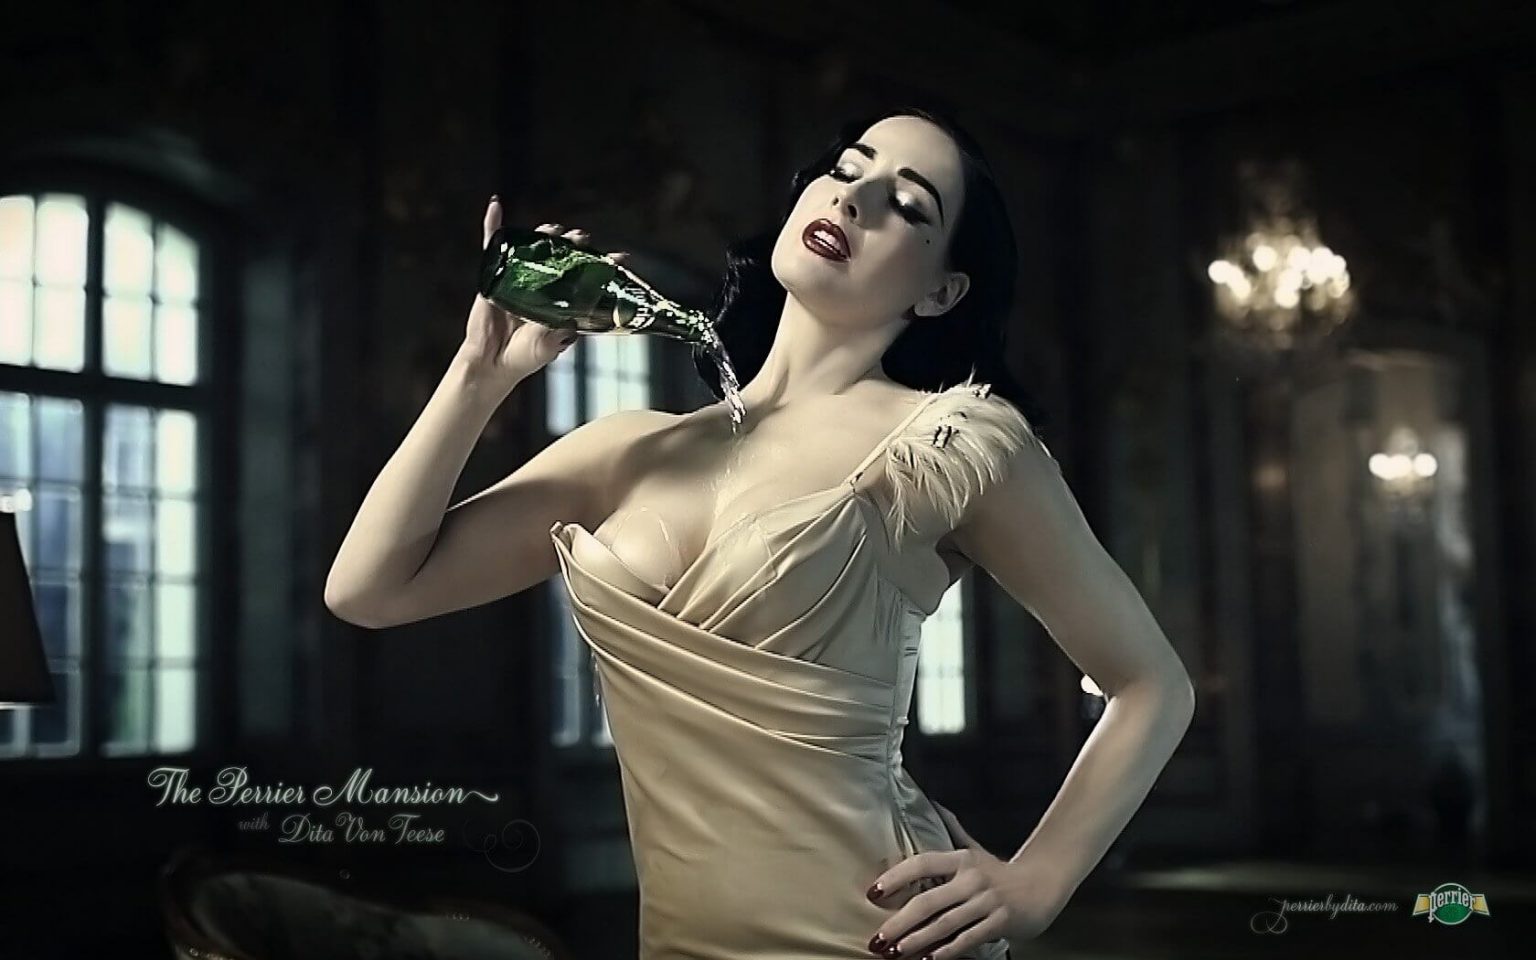 52 Dita Von Teese Nude Pictures Flaunt Her Well-Proportioned Body 11